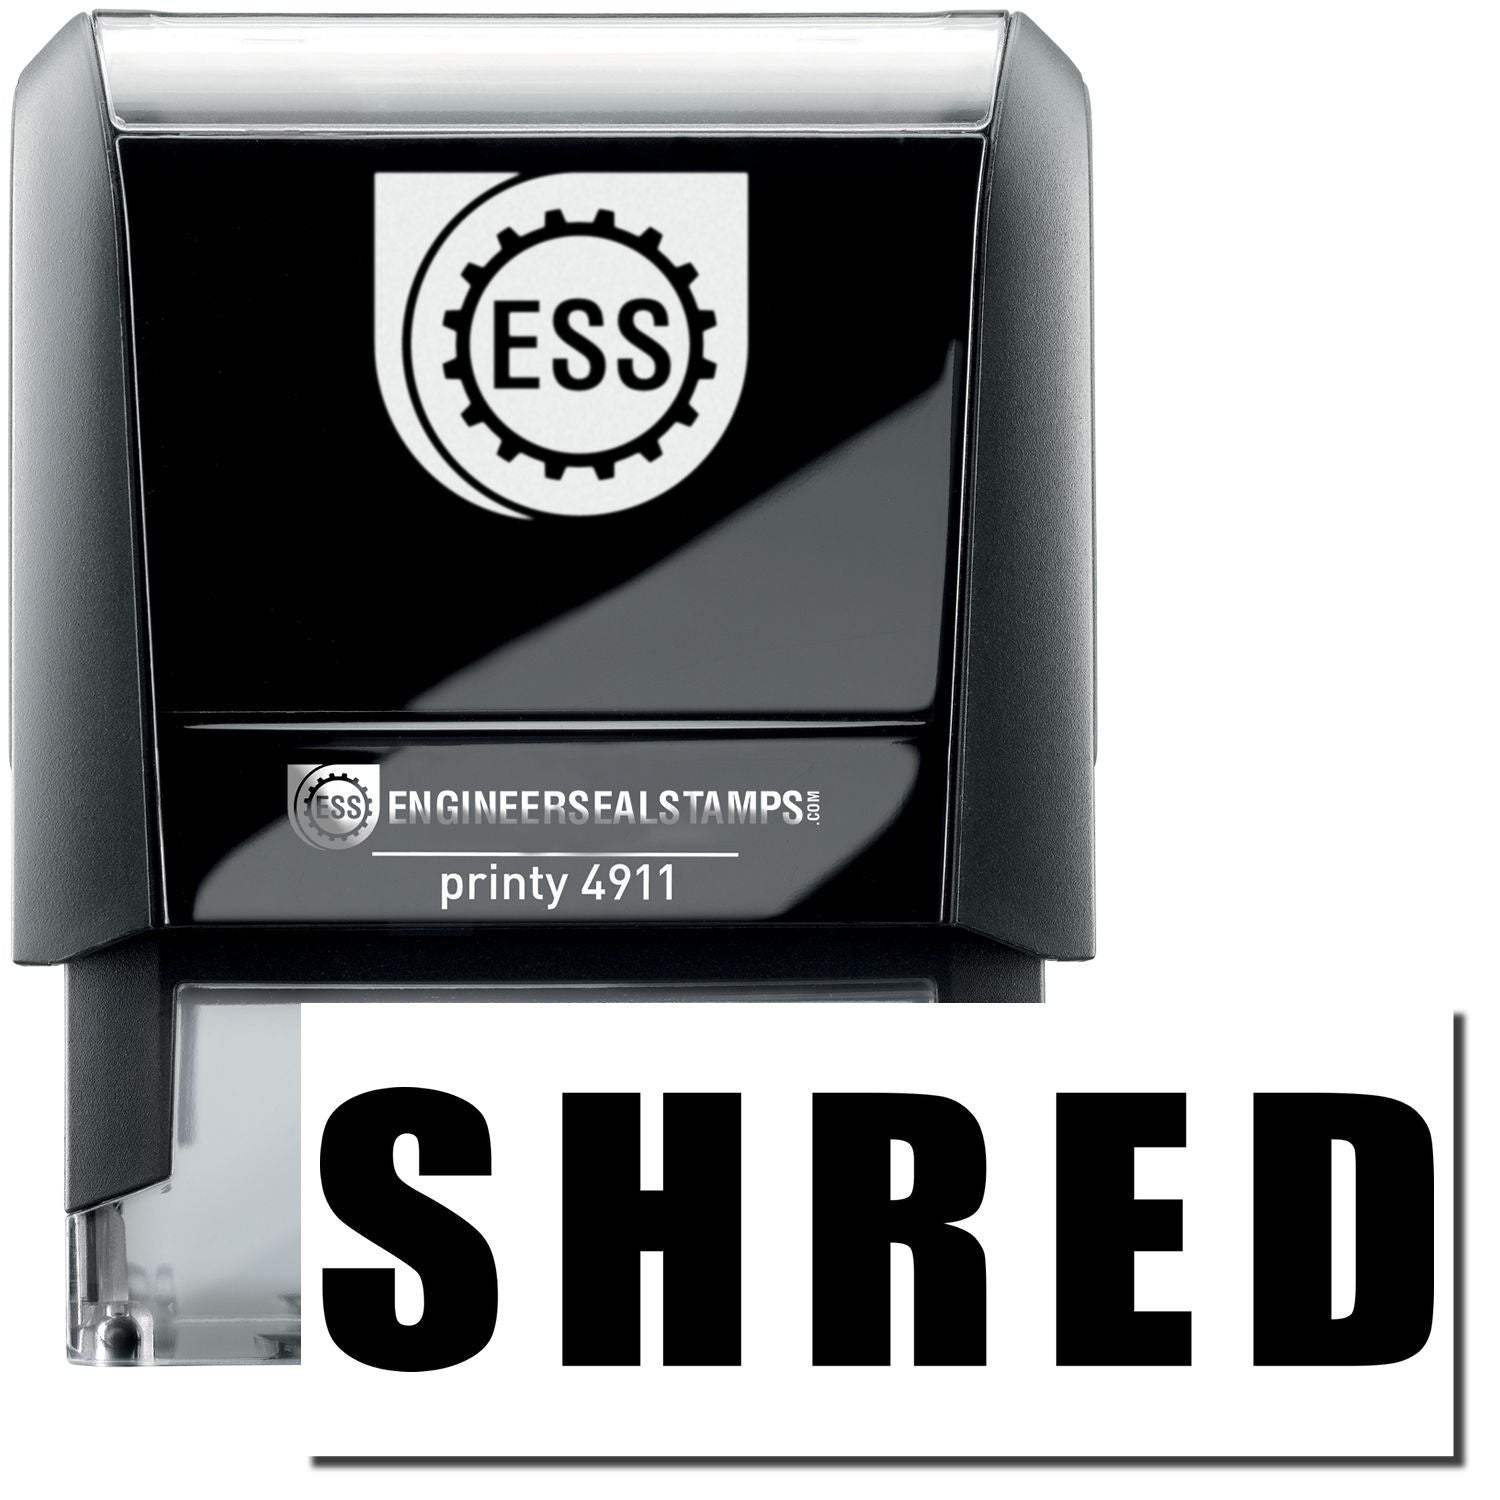 A self-inking stamp with a stamped image showing how the text "SHRED" in bold font is displayed after stamping.